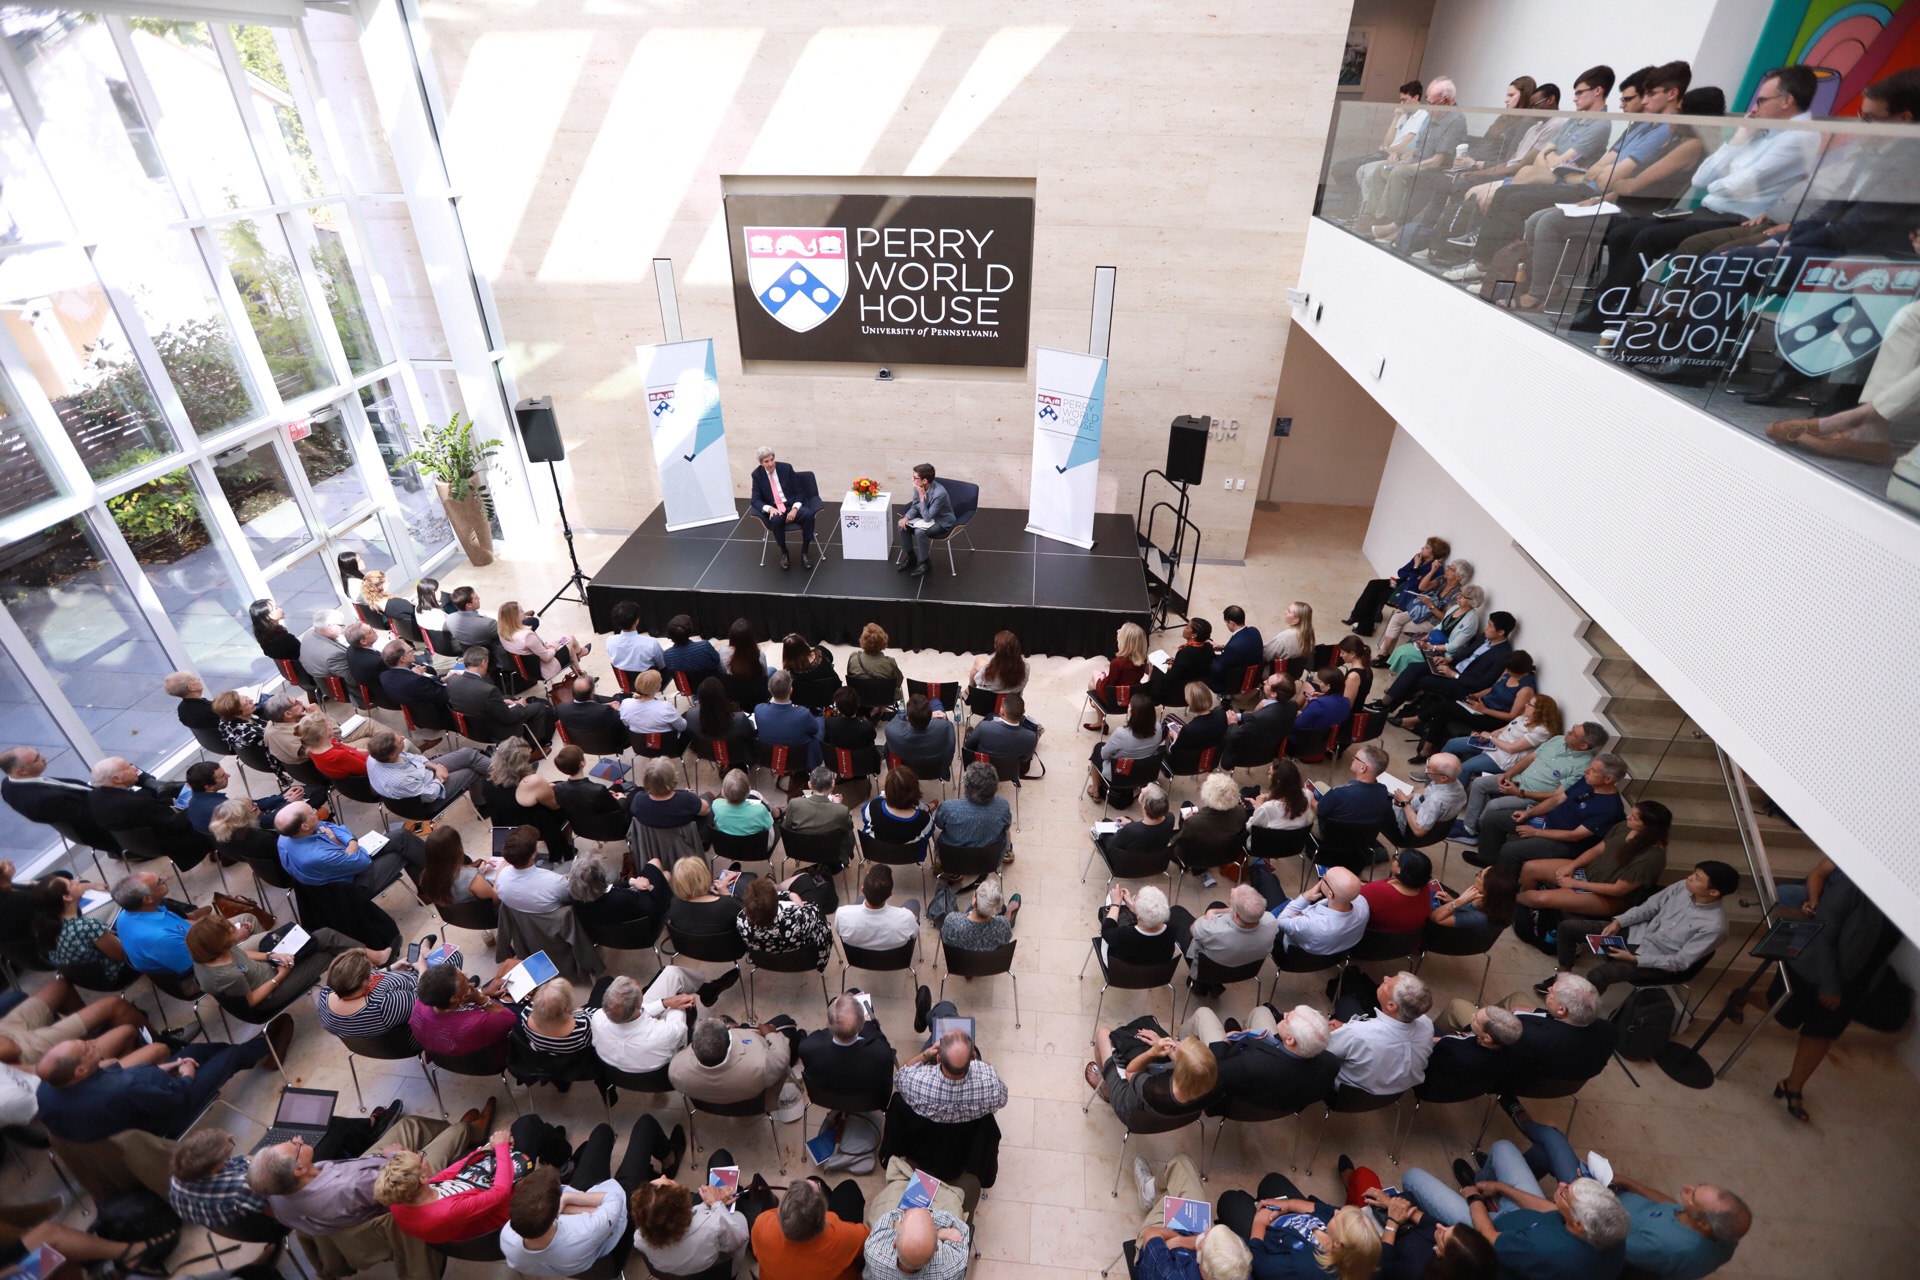 A large seated crowd at the Perry World House watches a discussion with John Kerry on stage.